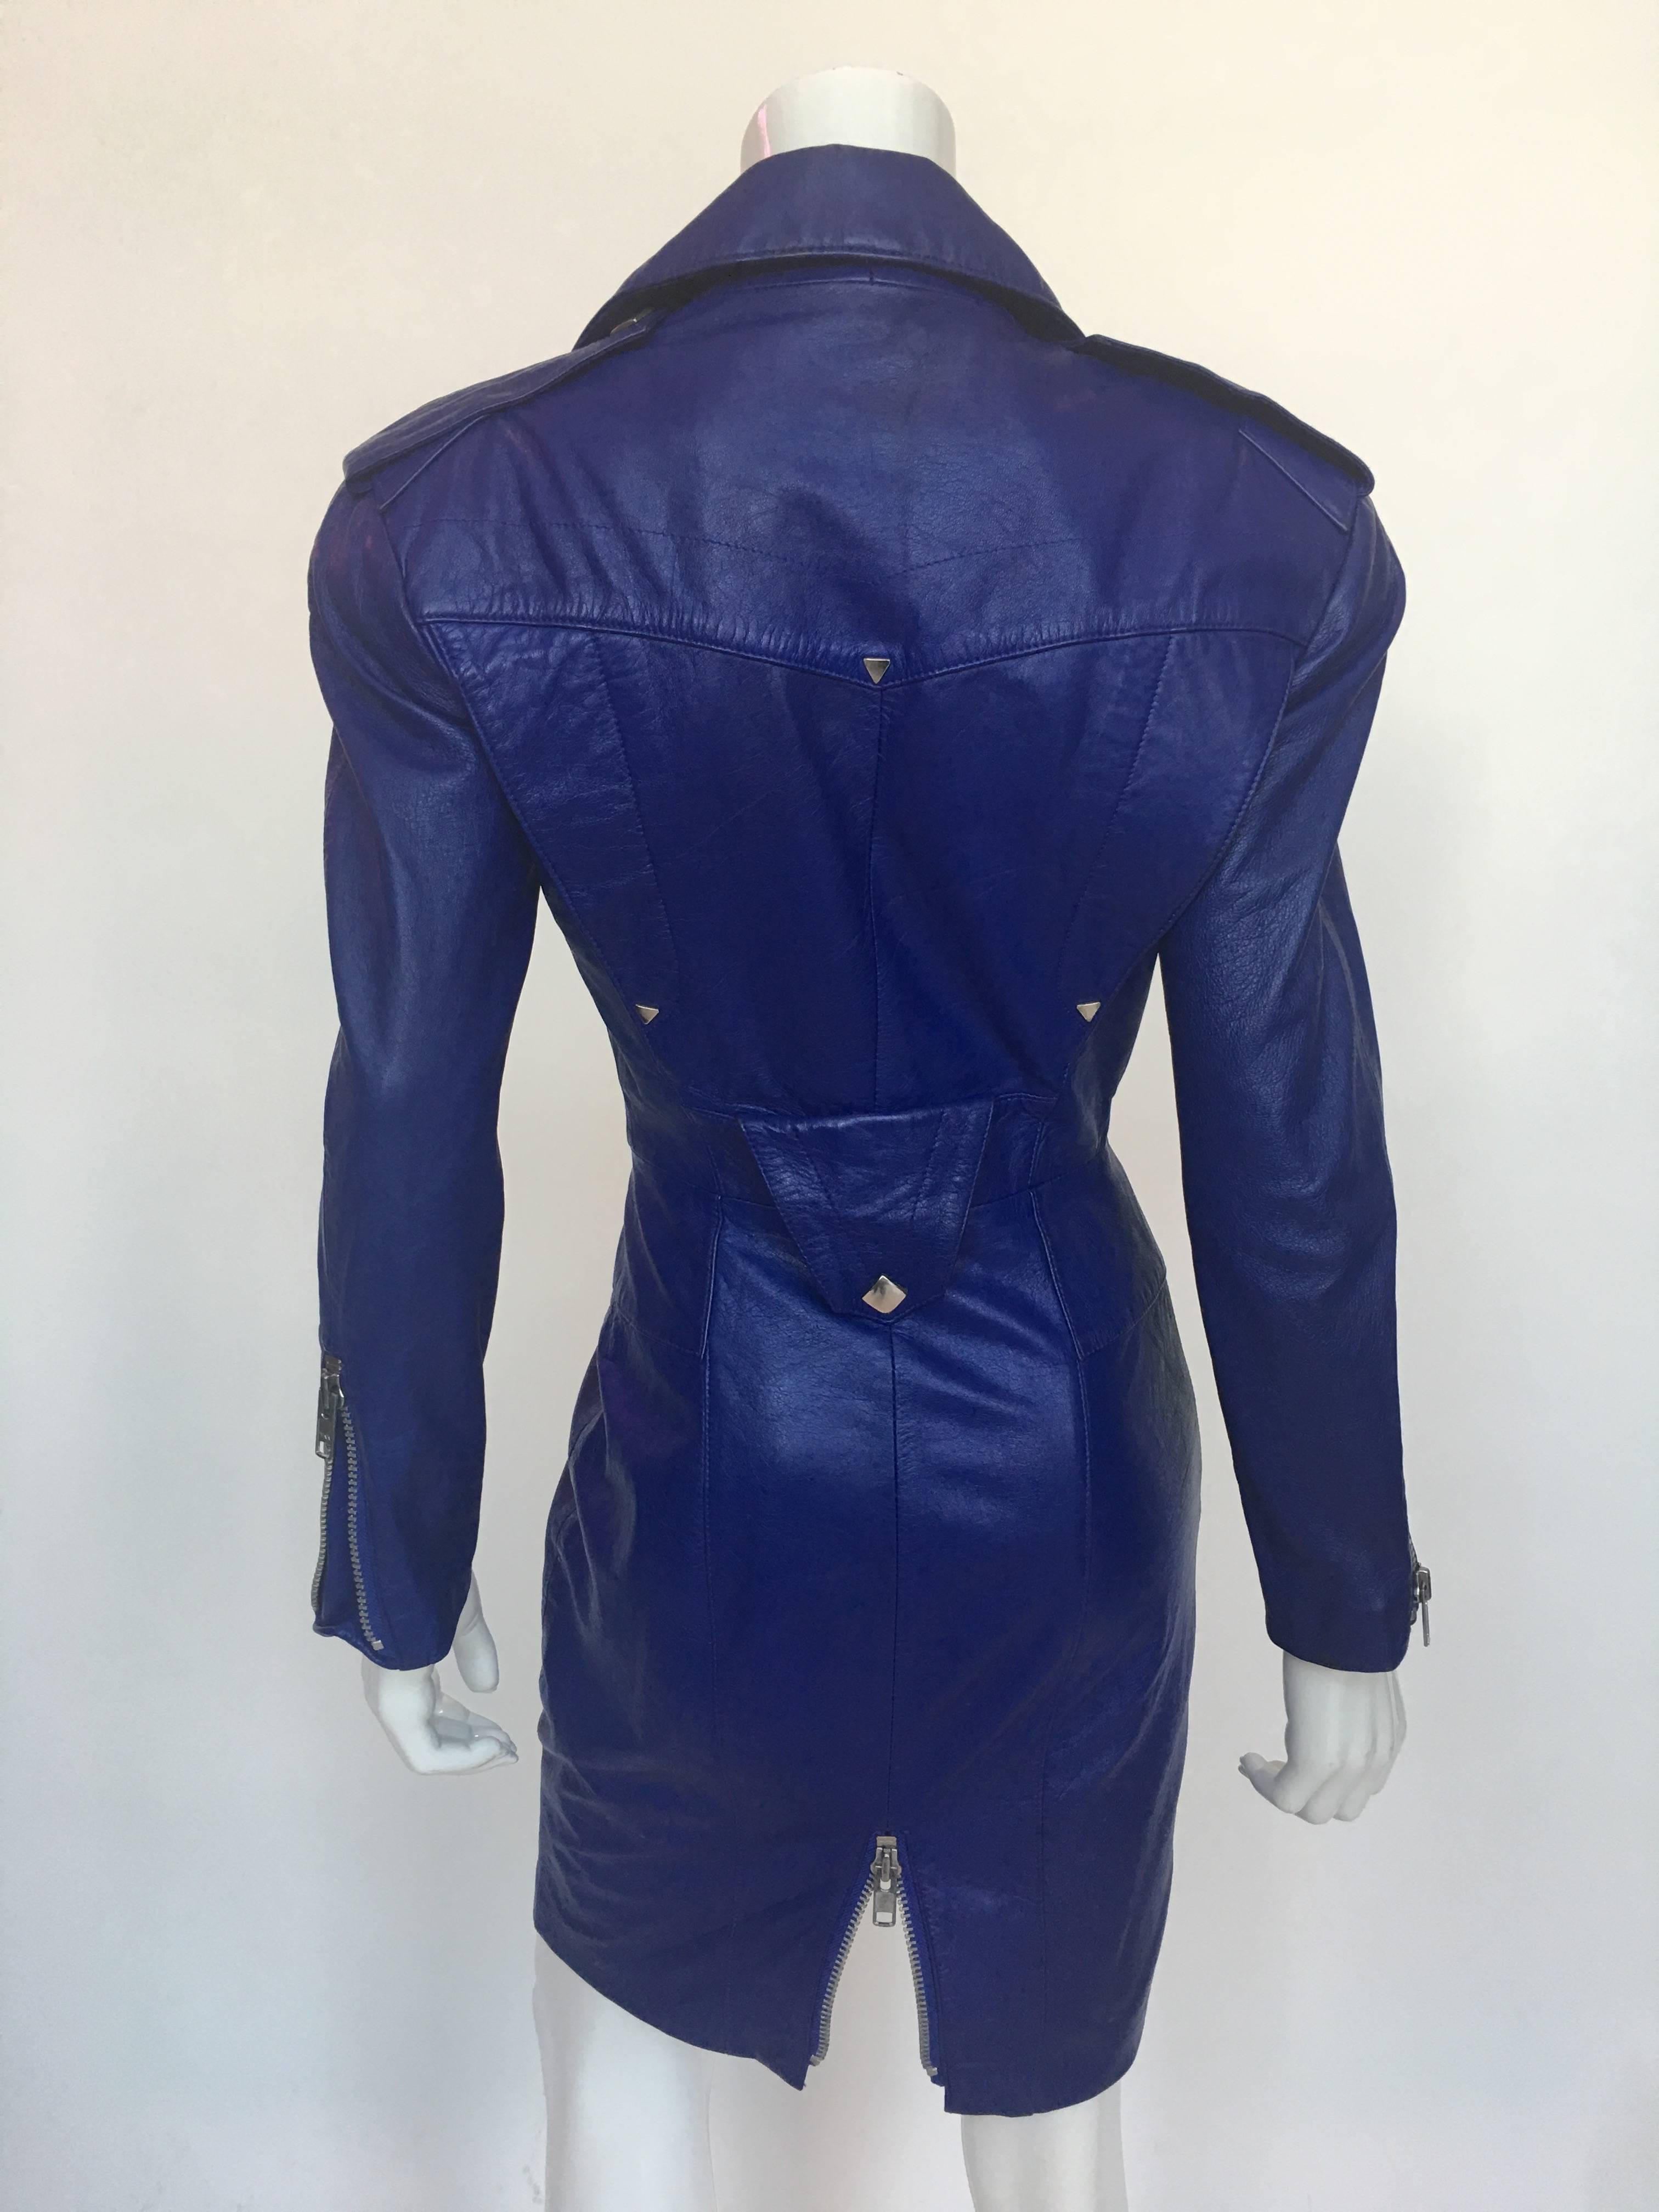 North Beach Leather Michael Hoban Purple/Blue Leather Moto dress with Zippers.

Size Label - Small

Measurements taken flat:
Shoulder Seam to shoulder seam - 19